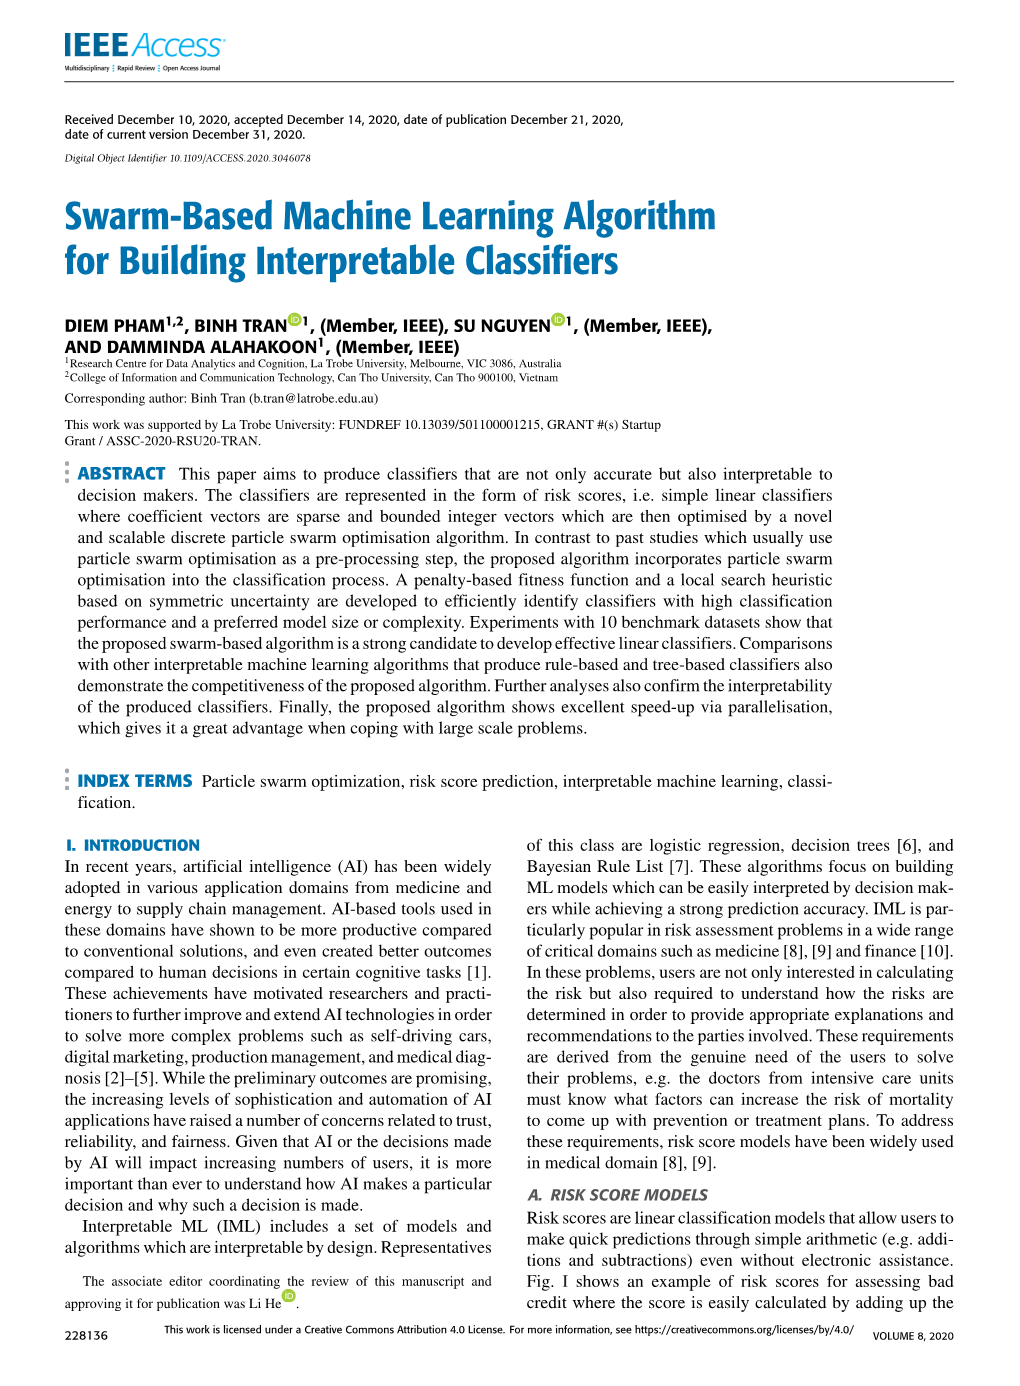 Swarm-Based Machine Learning Algorithm for Building Interpretable Classifiers